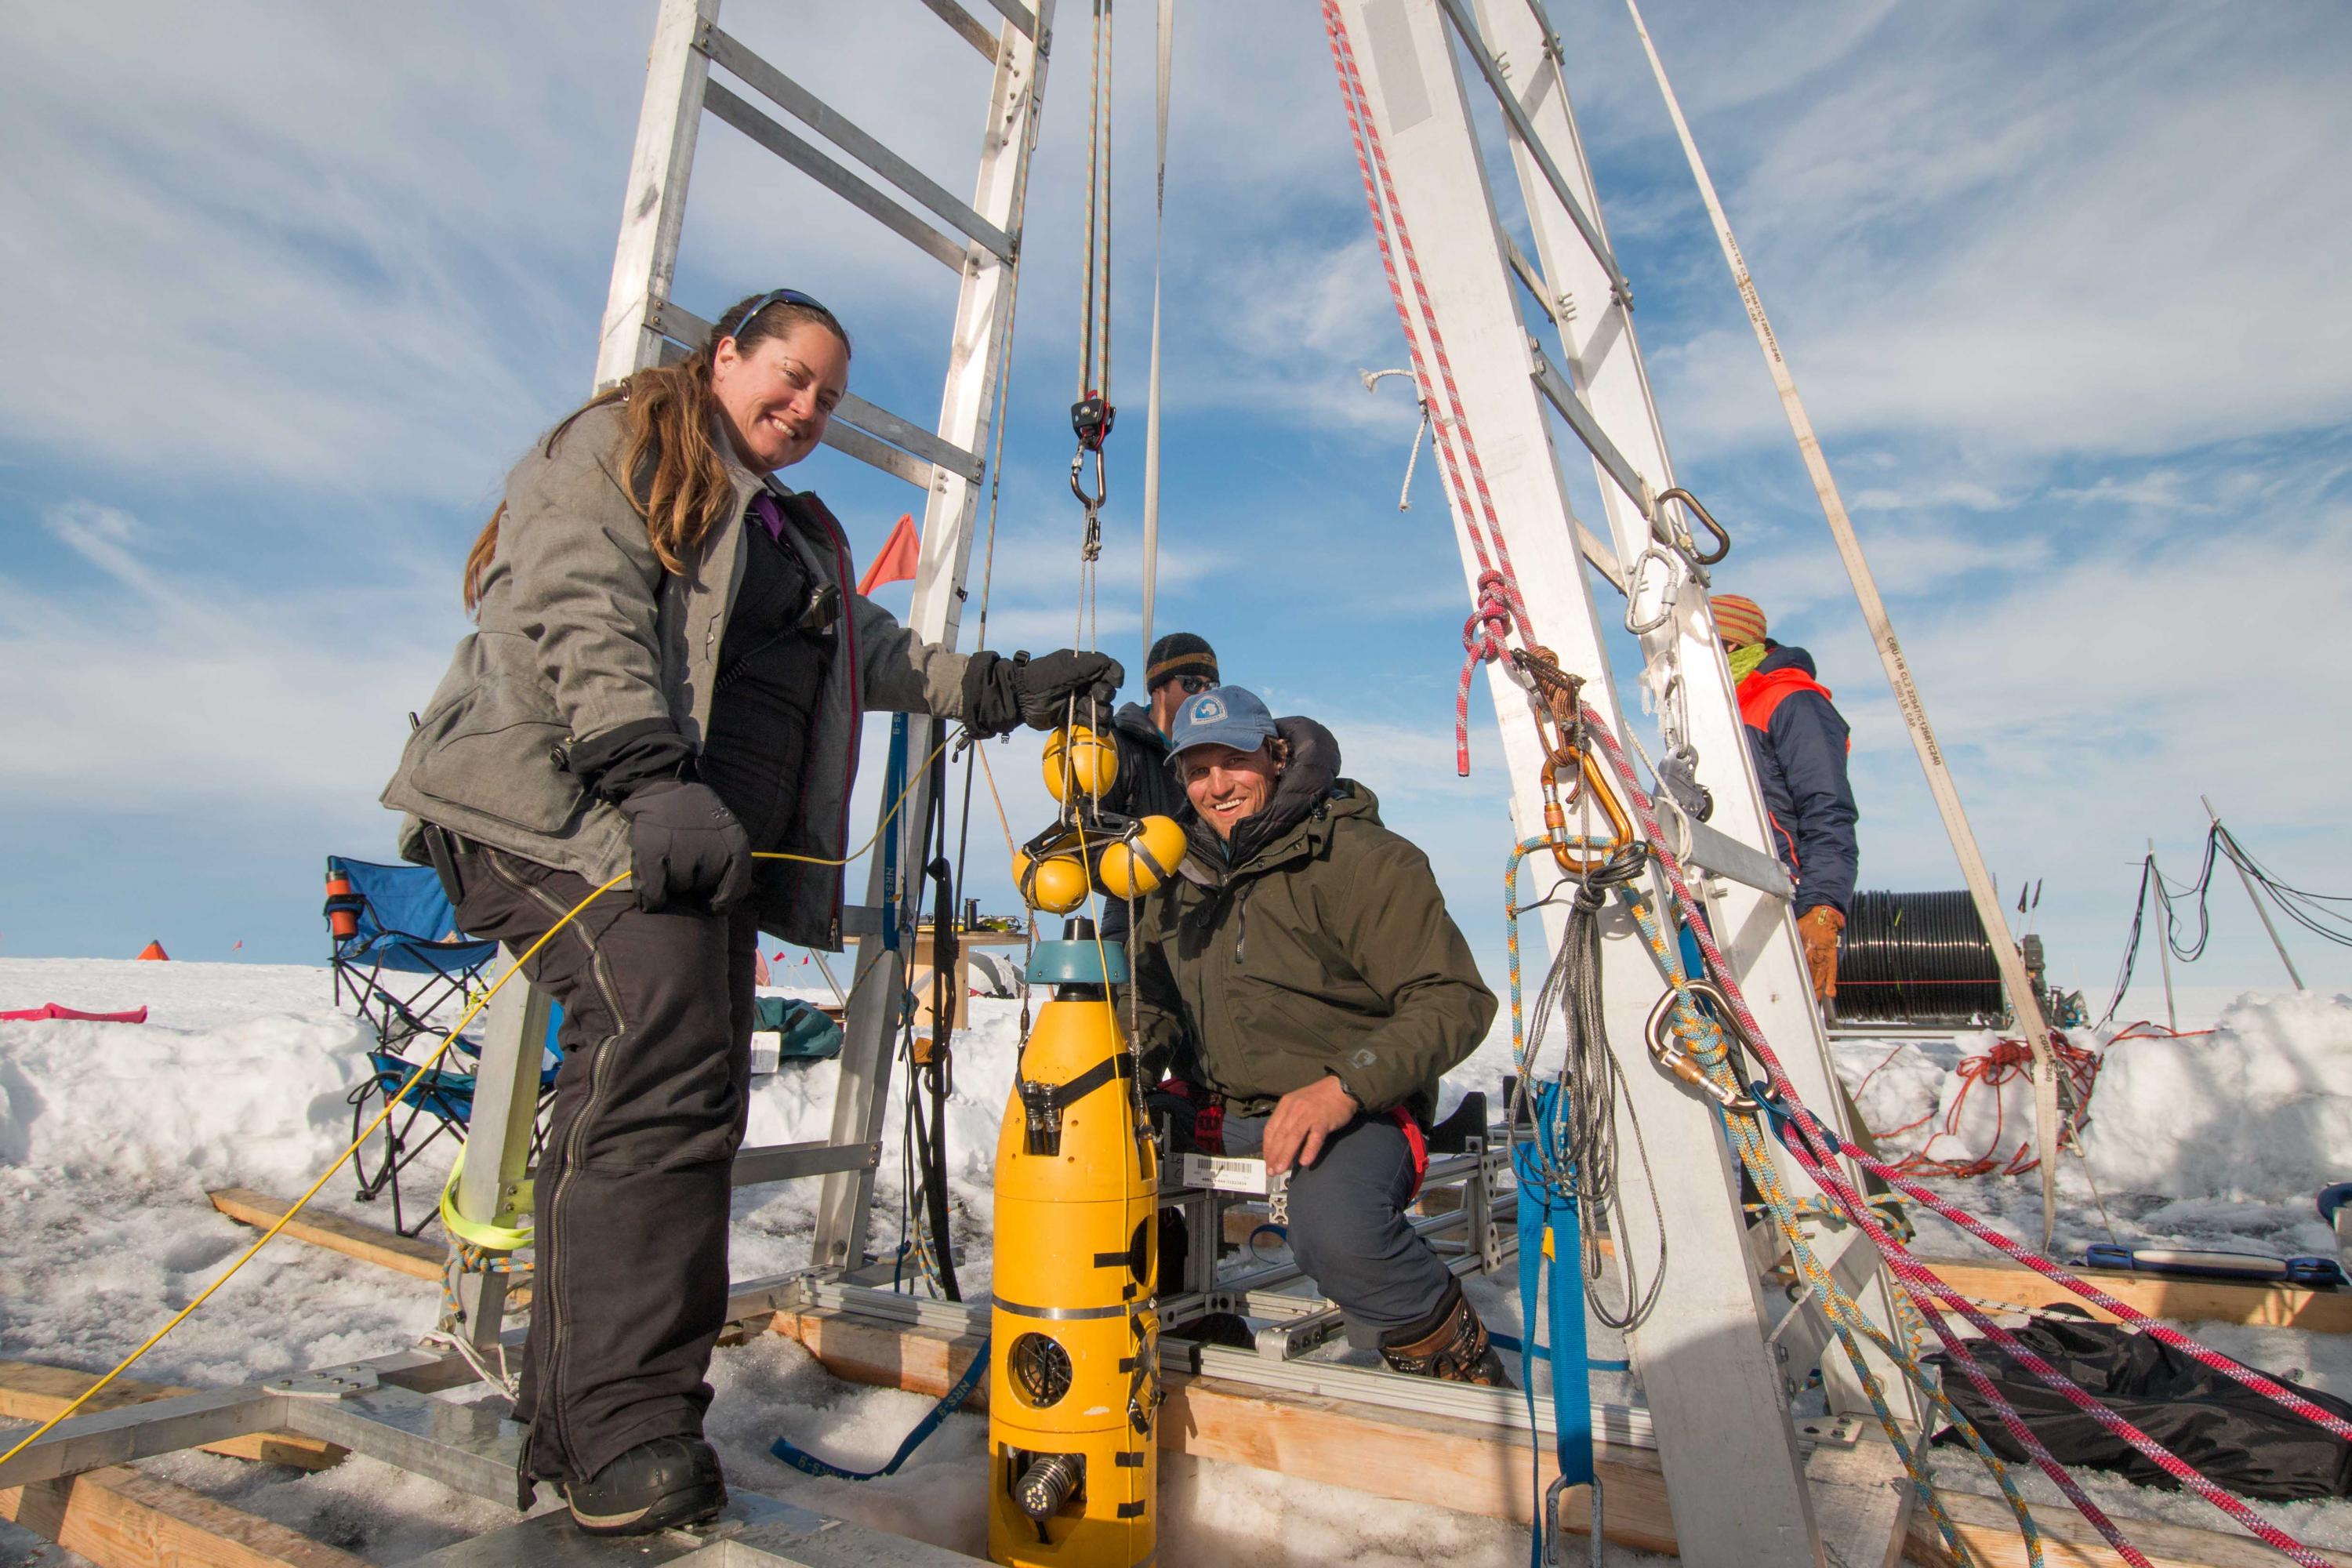  

ITGC researchers Britney Schmidt (l.) and Andy Mullen retrieve the robotic submarine Icefin after its last dive to the seafloor foundations of Thwaites Glacier. Icefin was engineered in Schmidt's lab at Georgia Tech. Credit: International Thwaites Glacier Collaboration / Georgia Tech-Schmidt / Dichek